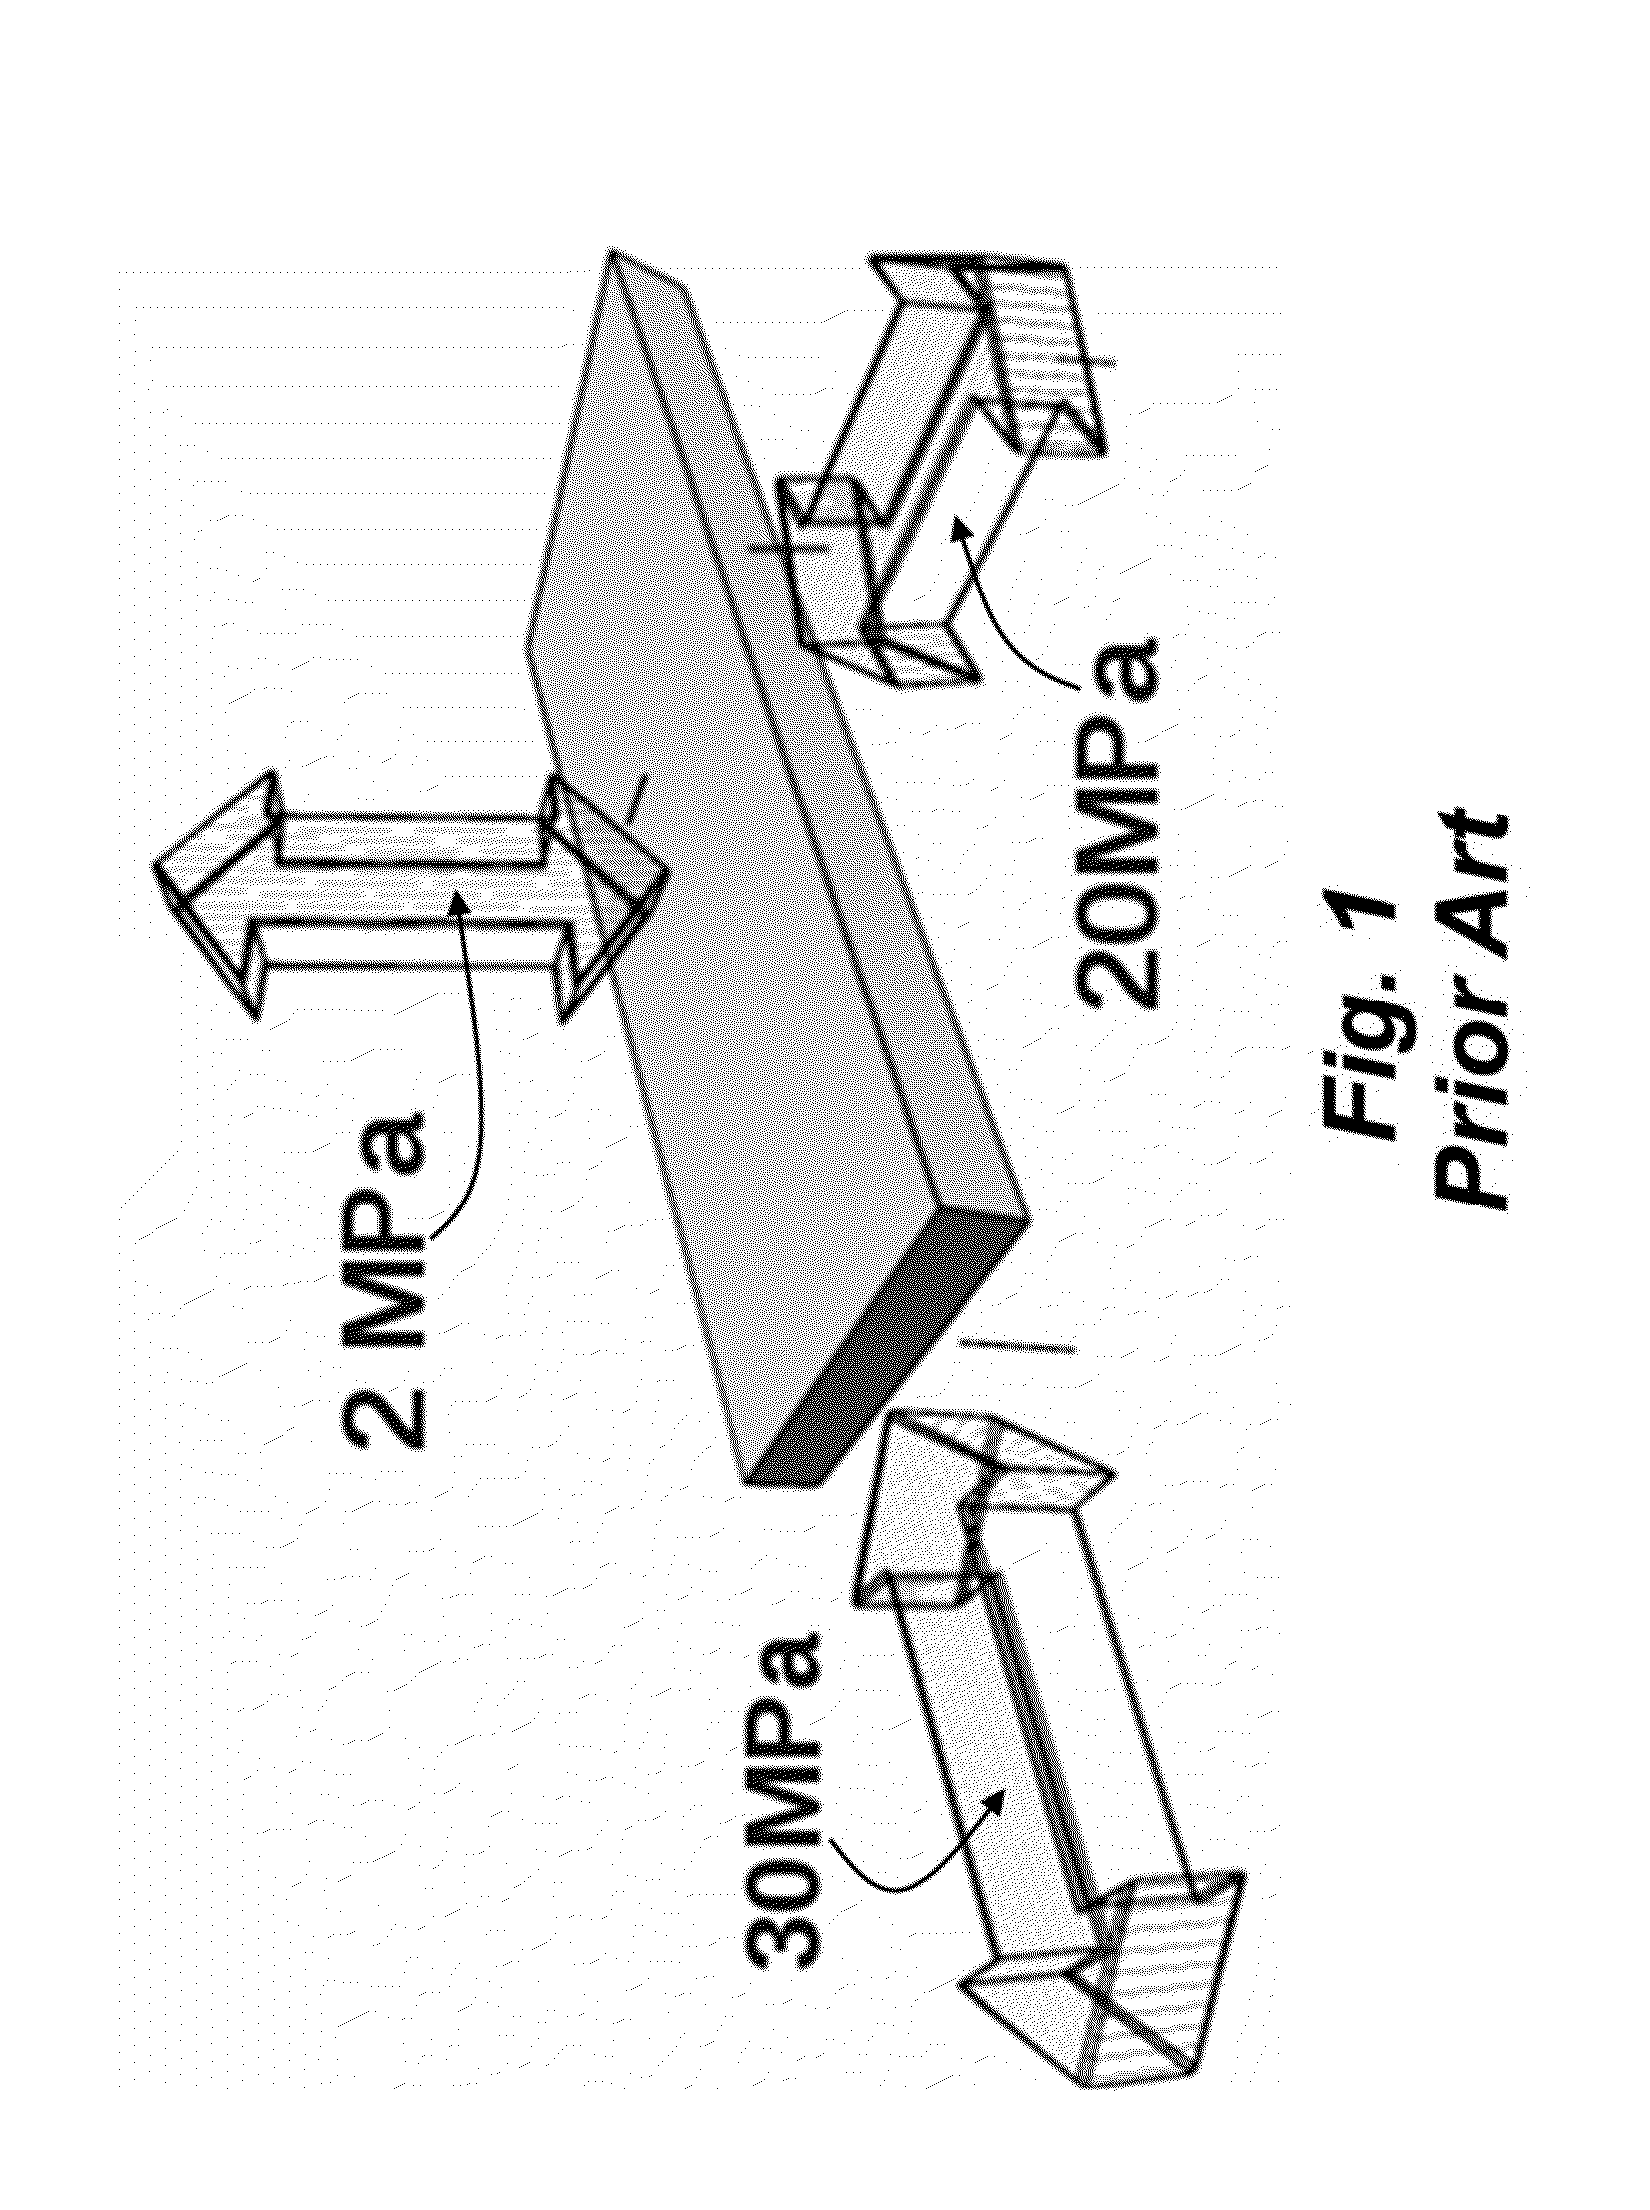 Method and Apparatus for Additively Manufacturing of Objects Based on Tensile Strength